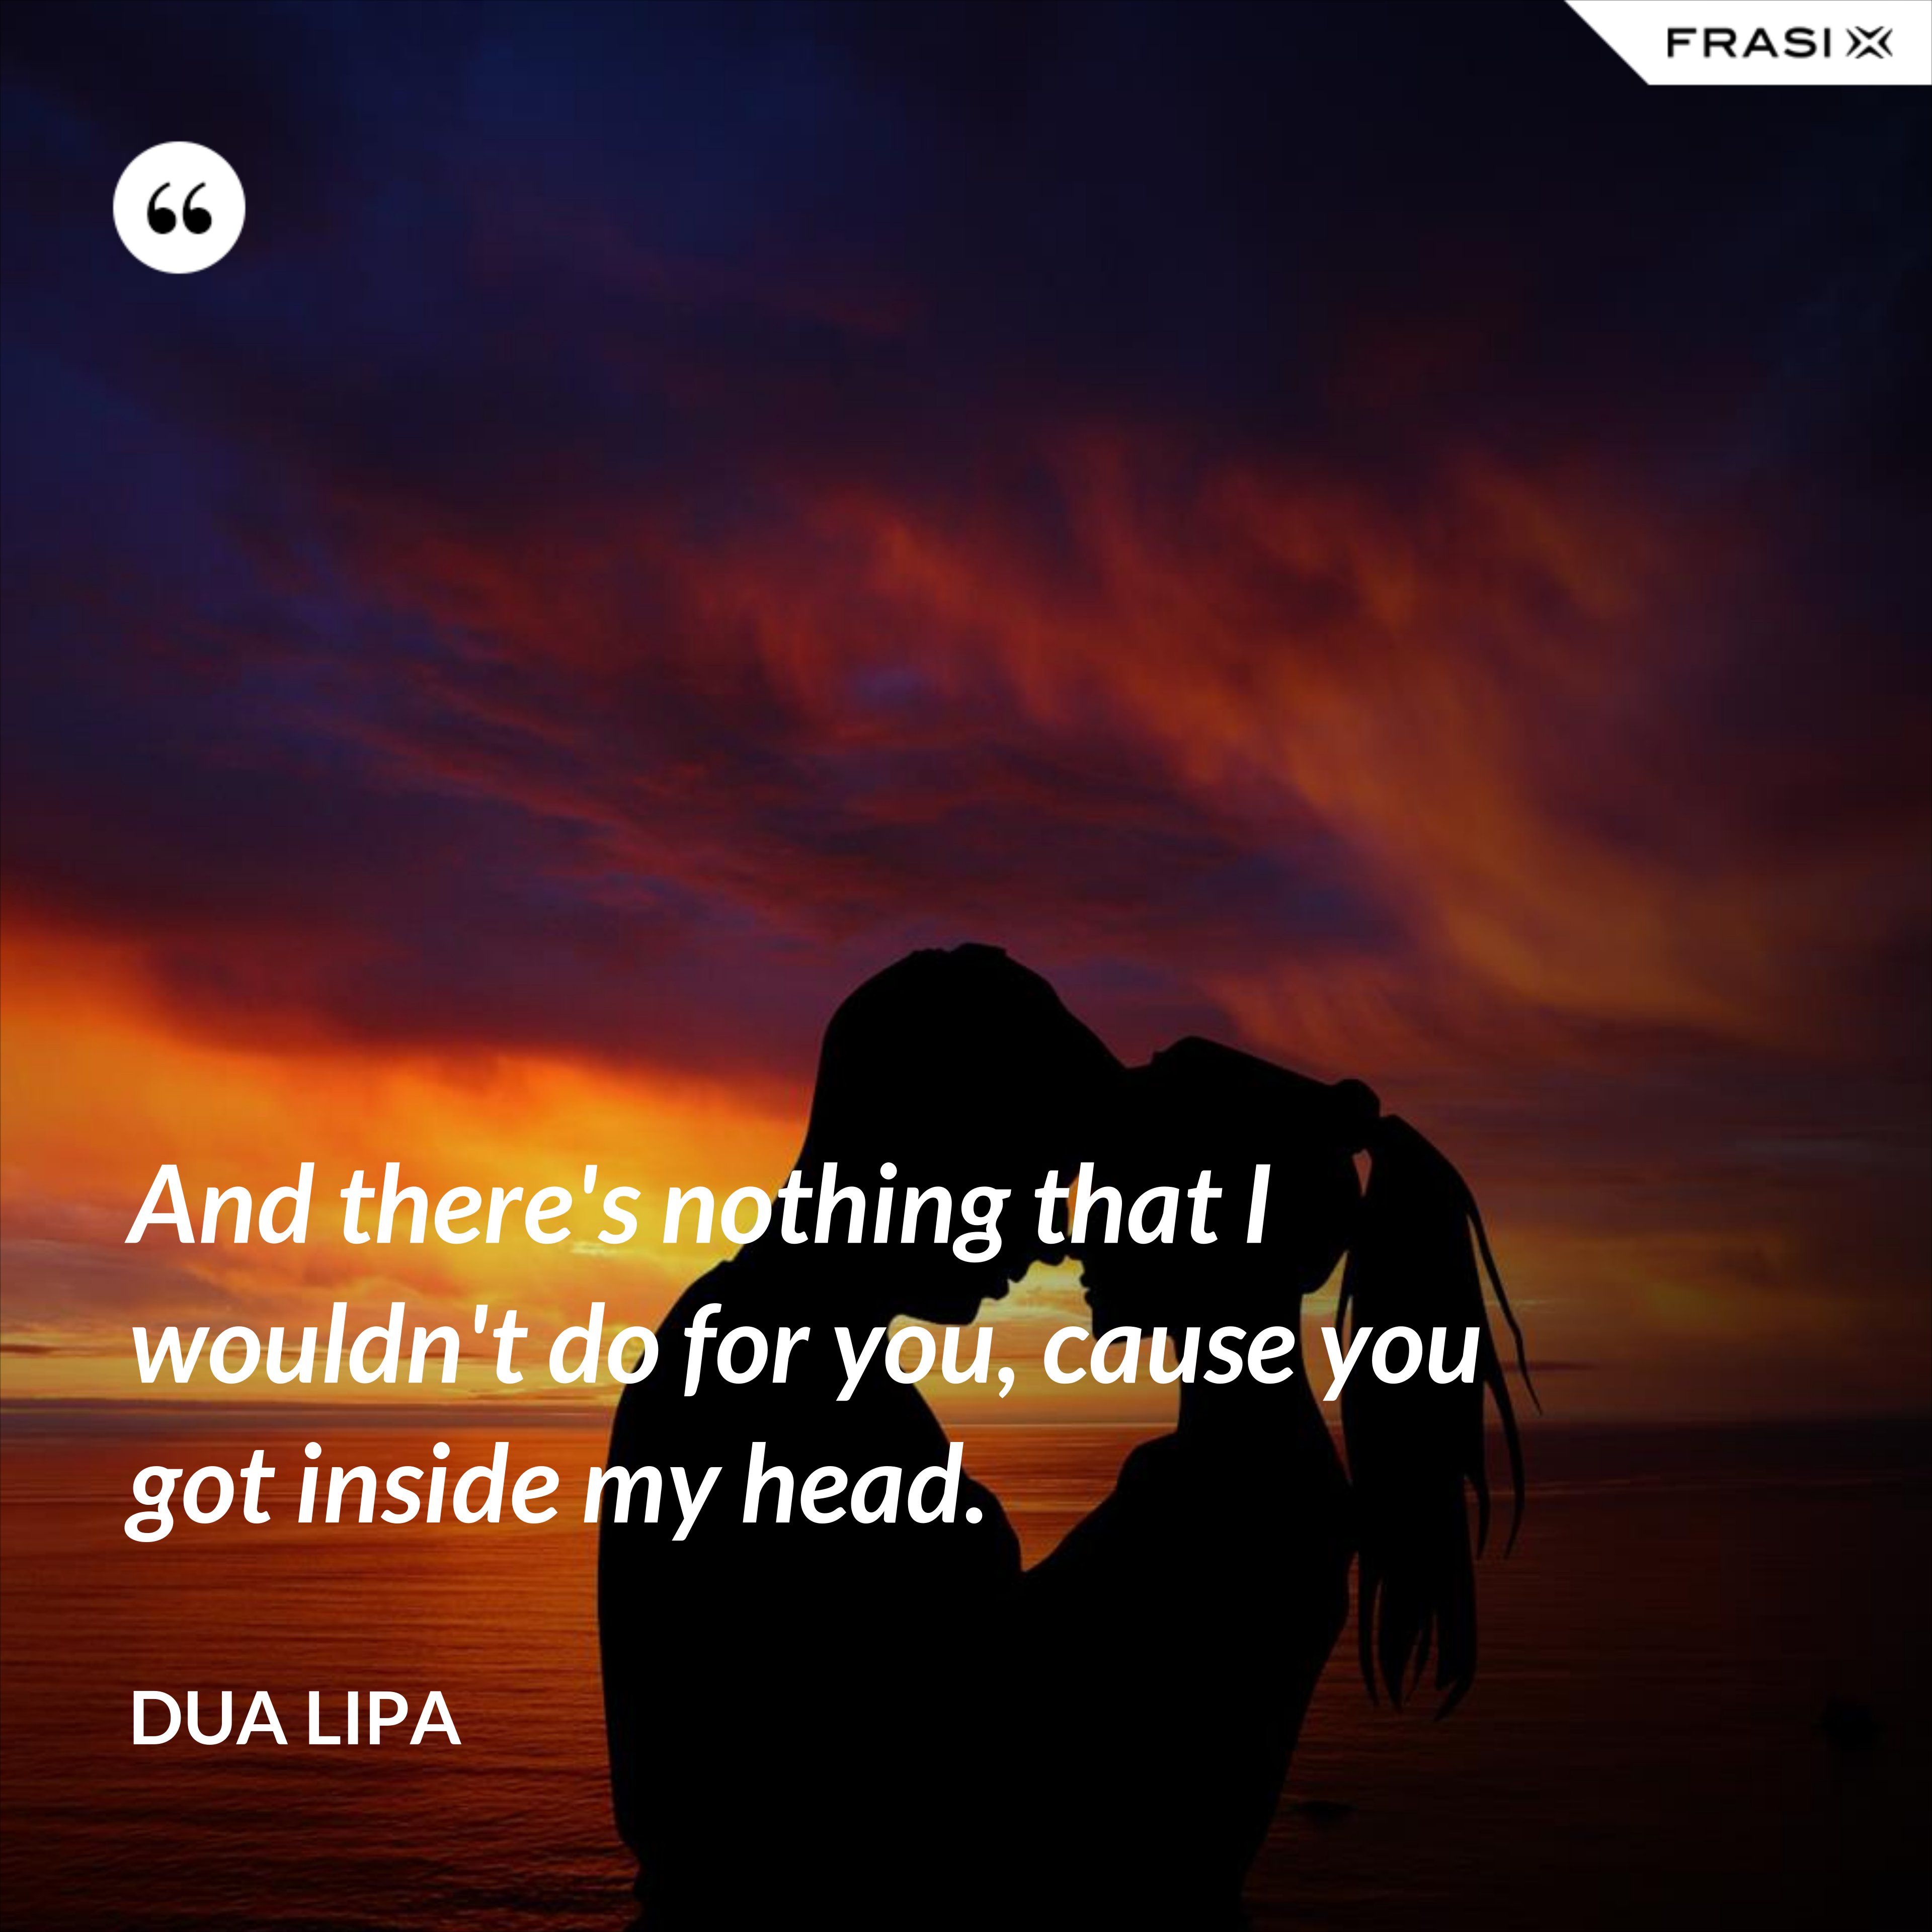 And there's nothing that I wouldn't do for you, cause you got inside my head. - Dua Lipa